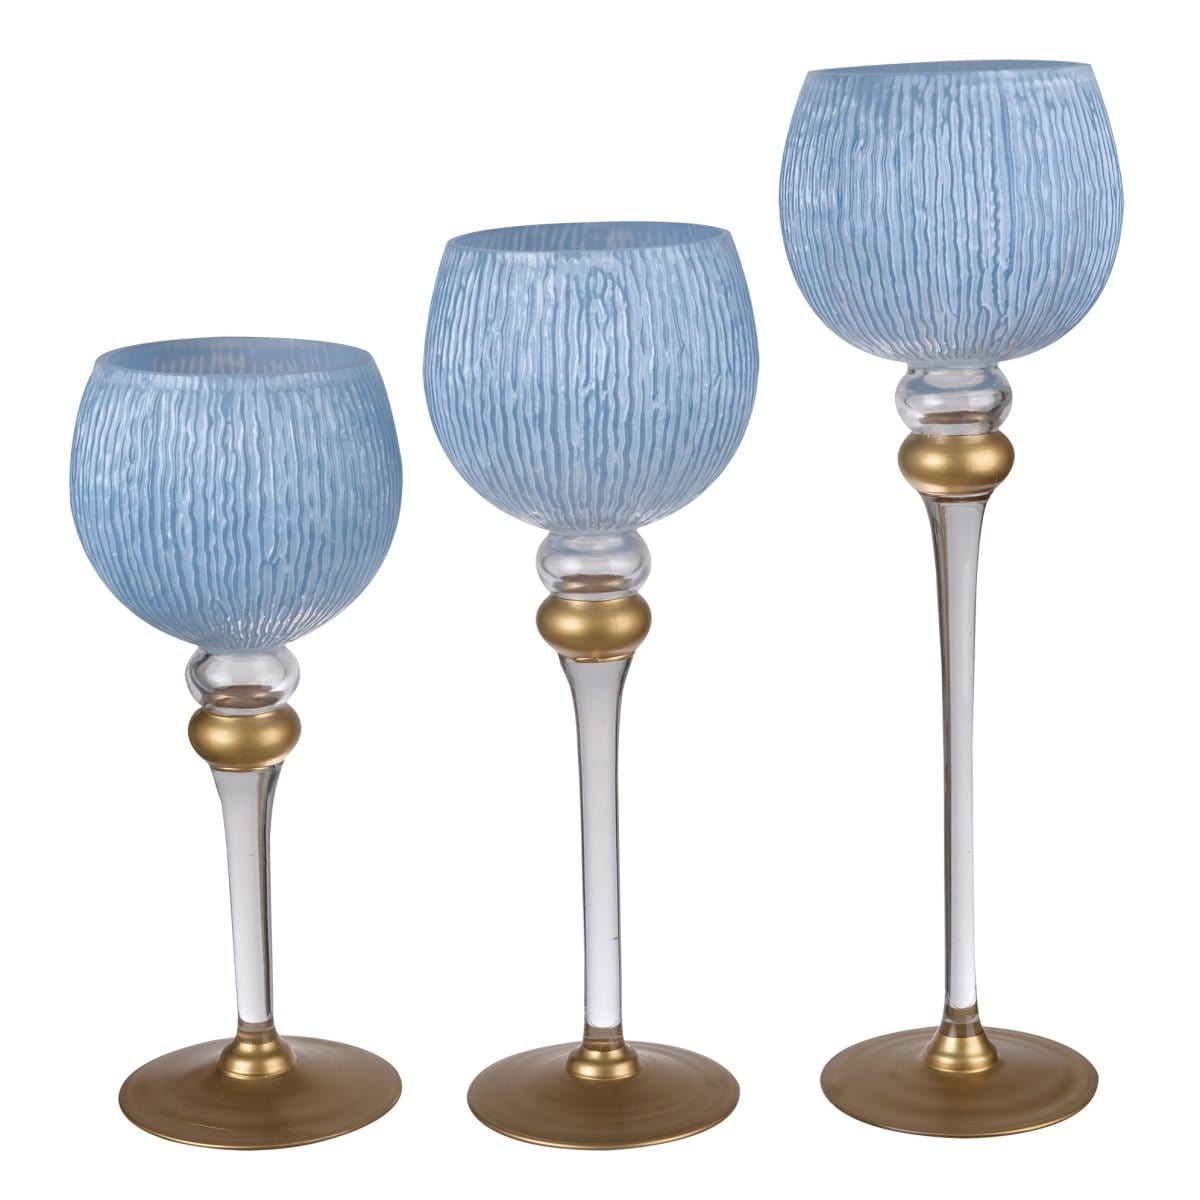 AB-75623-BLWH S/3 BALLICO CANDLE HOLDERS,BLUE/WHITE picket and rail